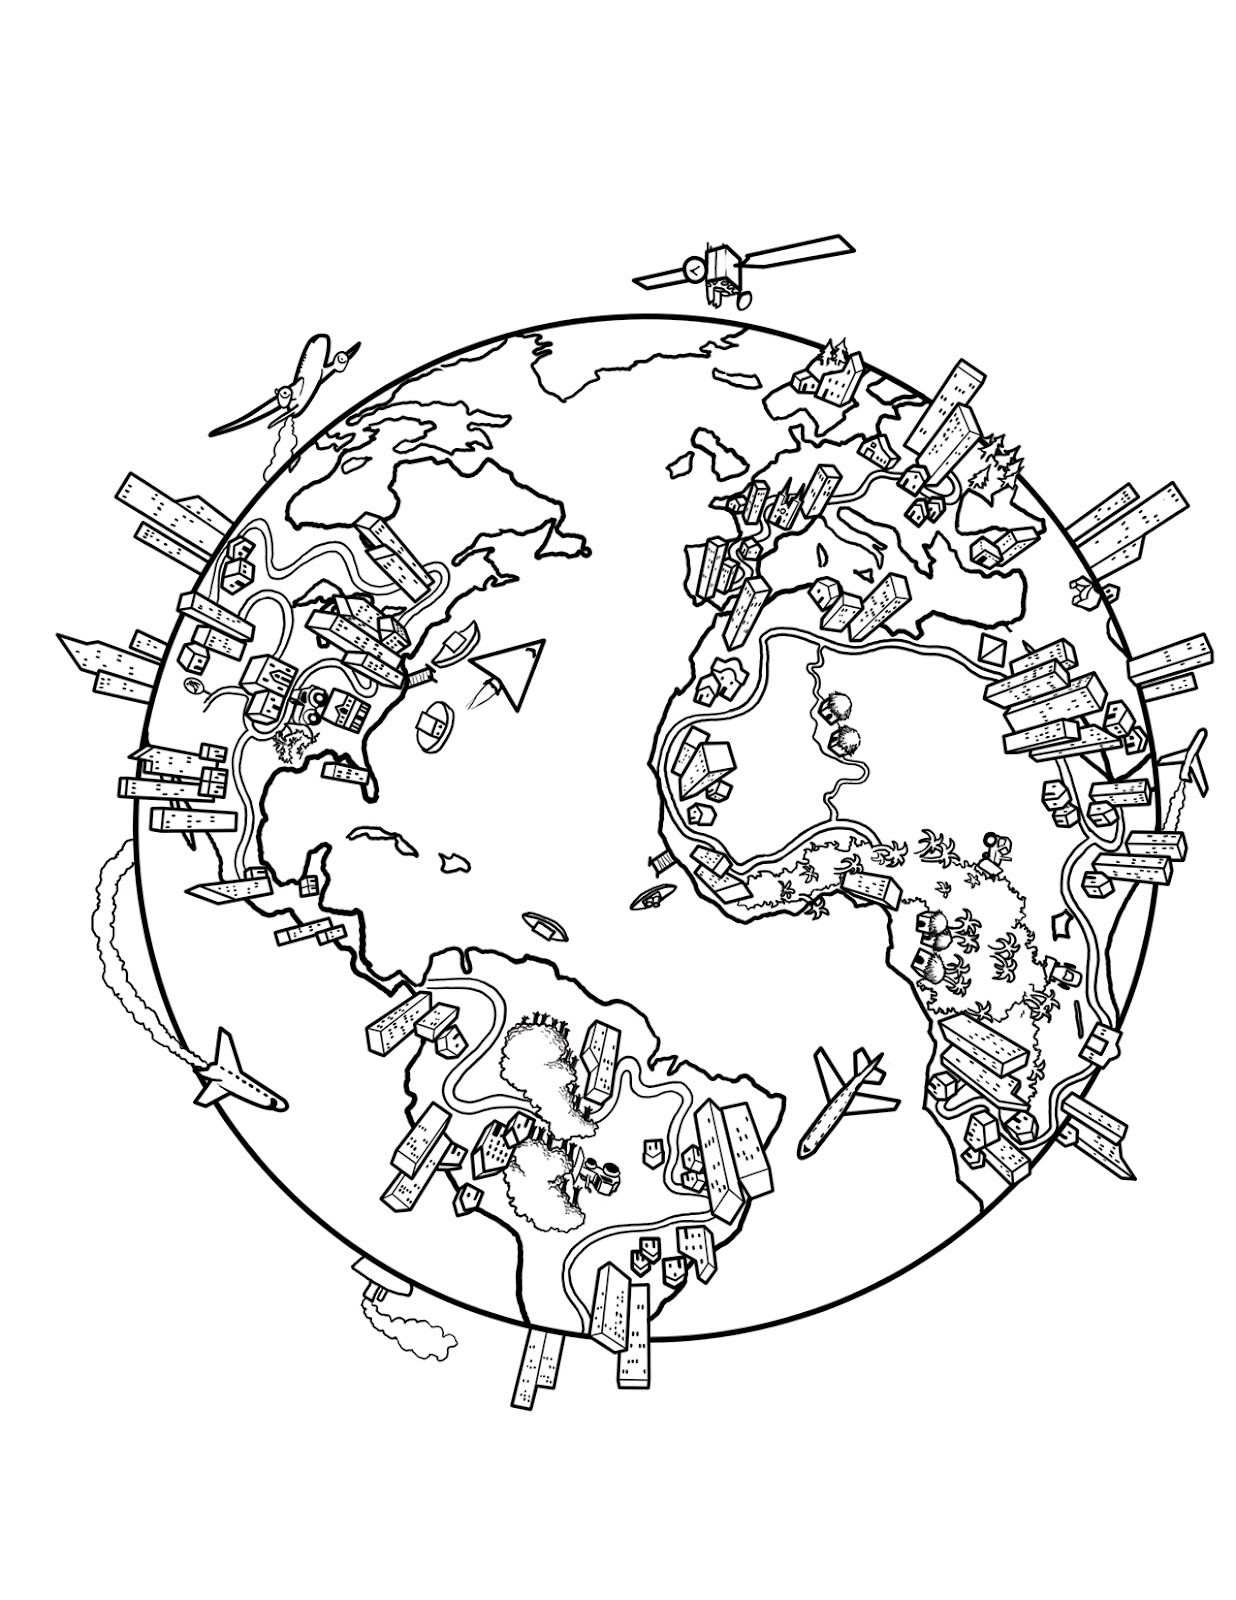 Countries Coloring Pages Coloring Page World Map Coloring Page This Is A Drawing I Did A